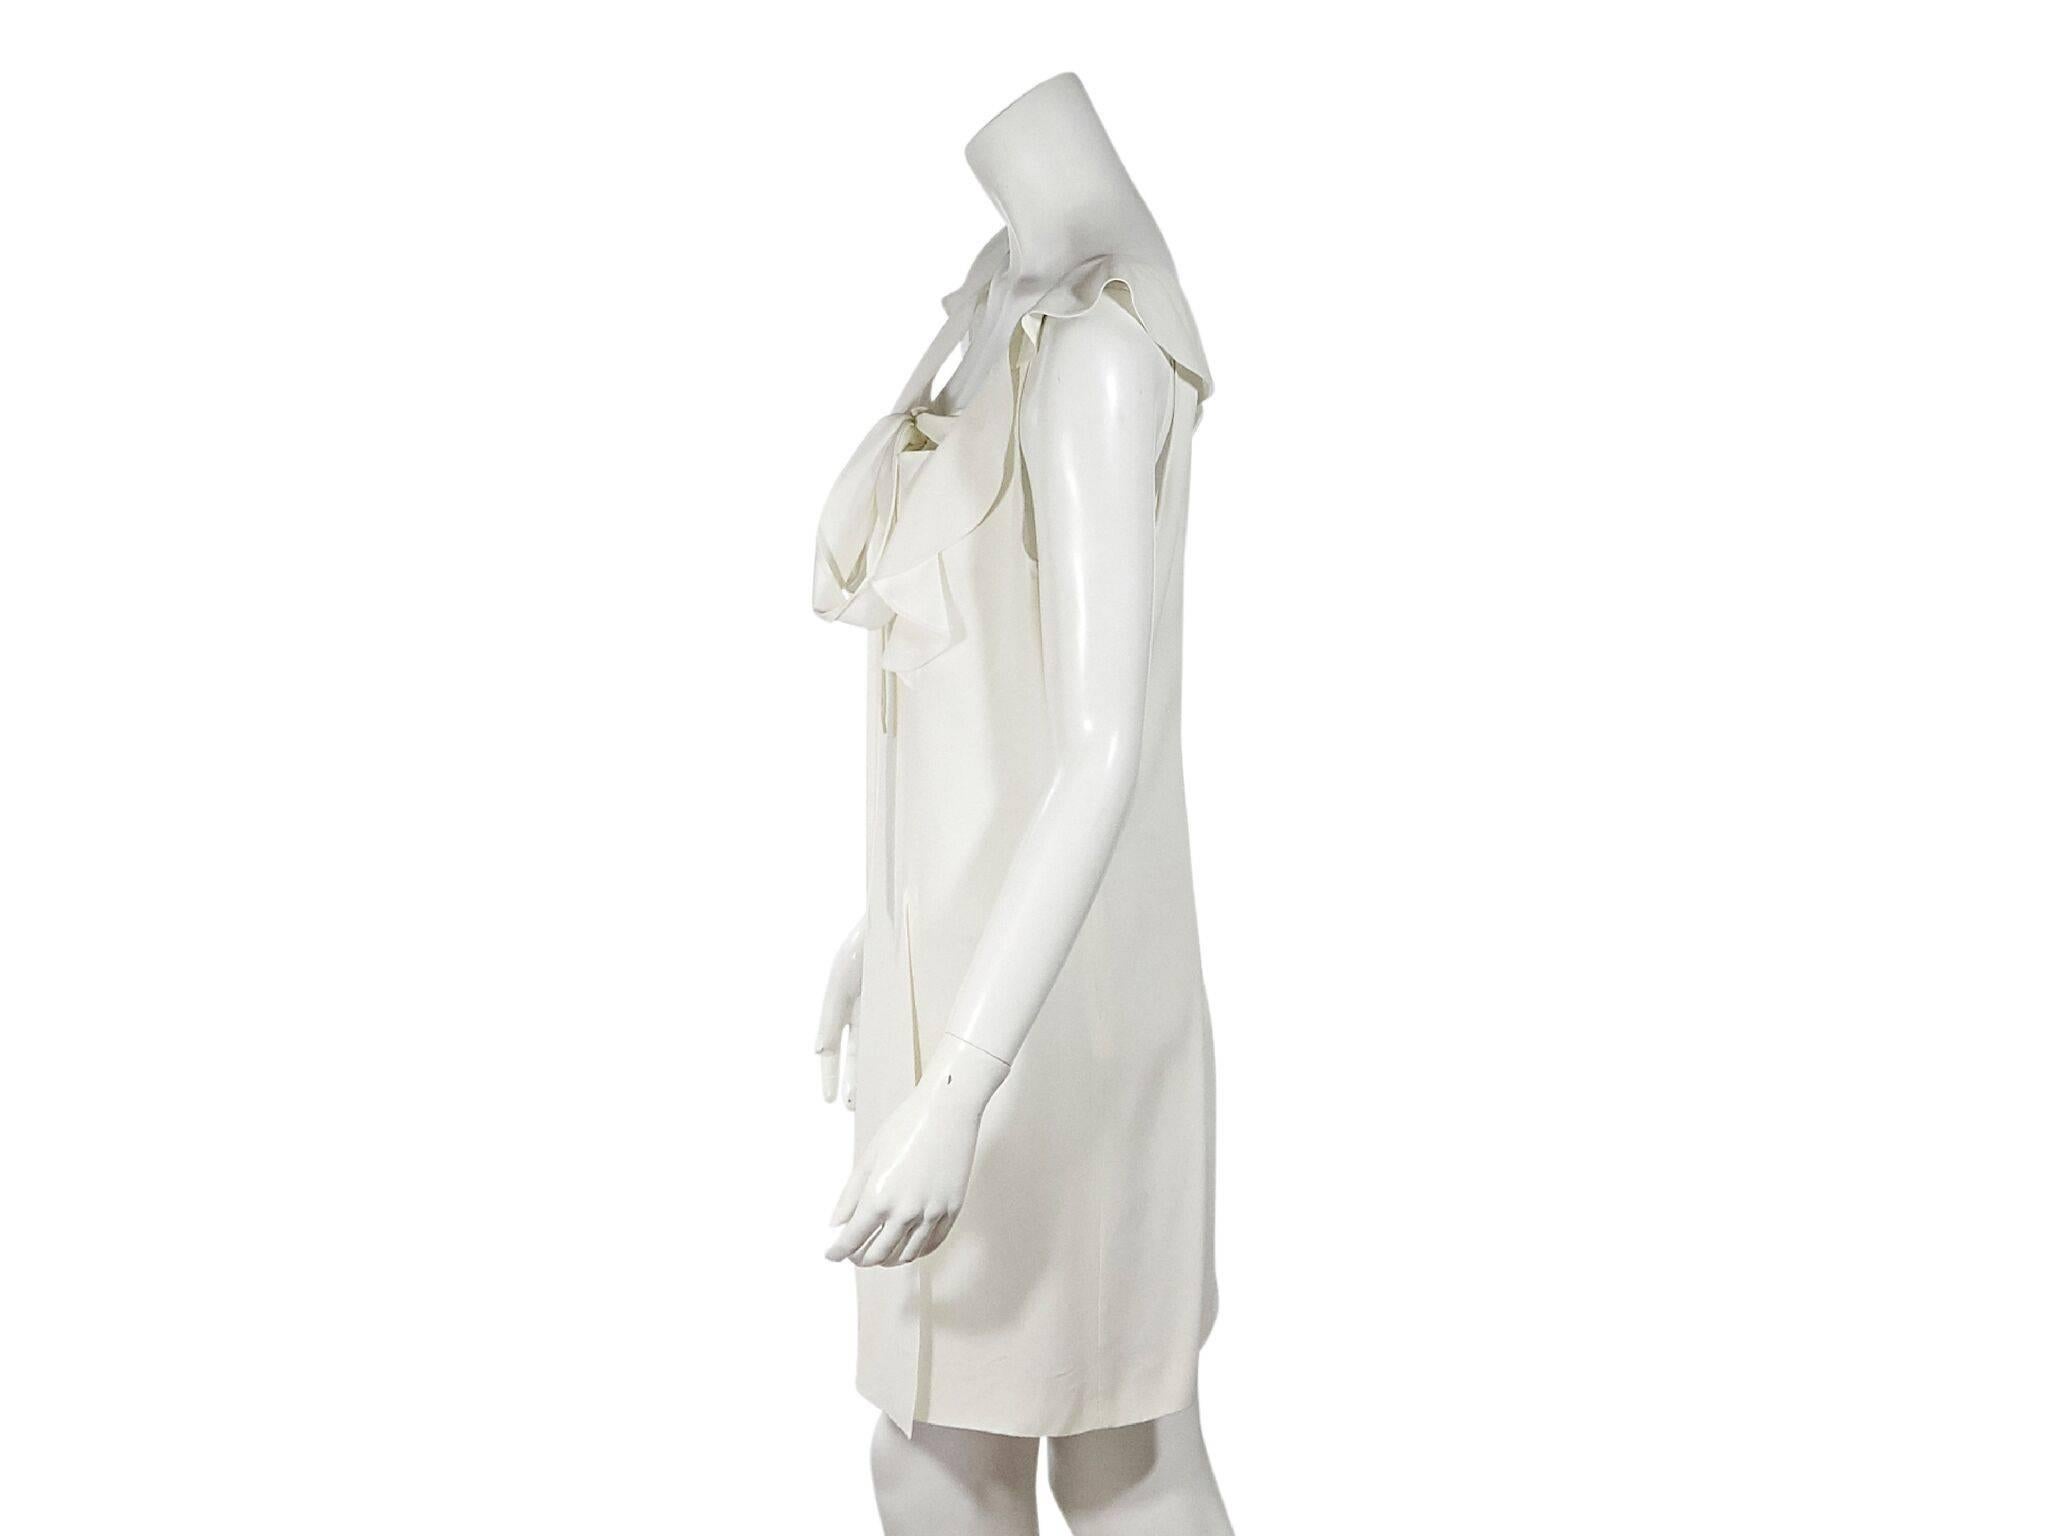 Product details:  White silk dress by Miu Miu.  Scoopneck with tie detail.  Sleeveless.  Concealed side zip closure.  Label size IT 40.  38